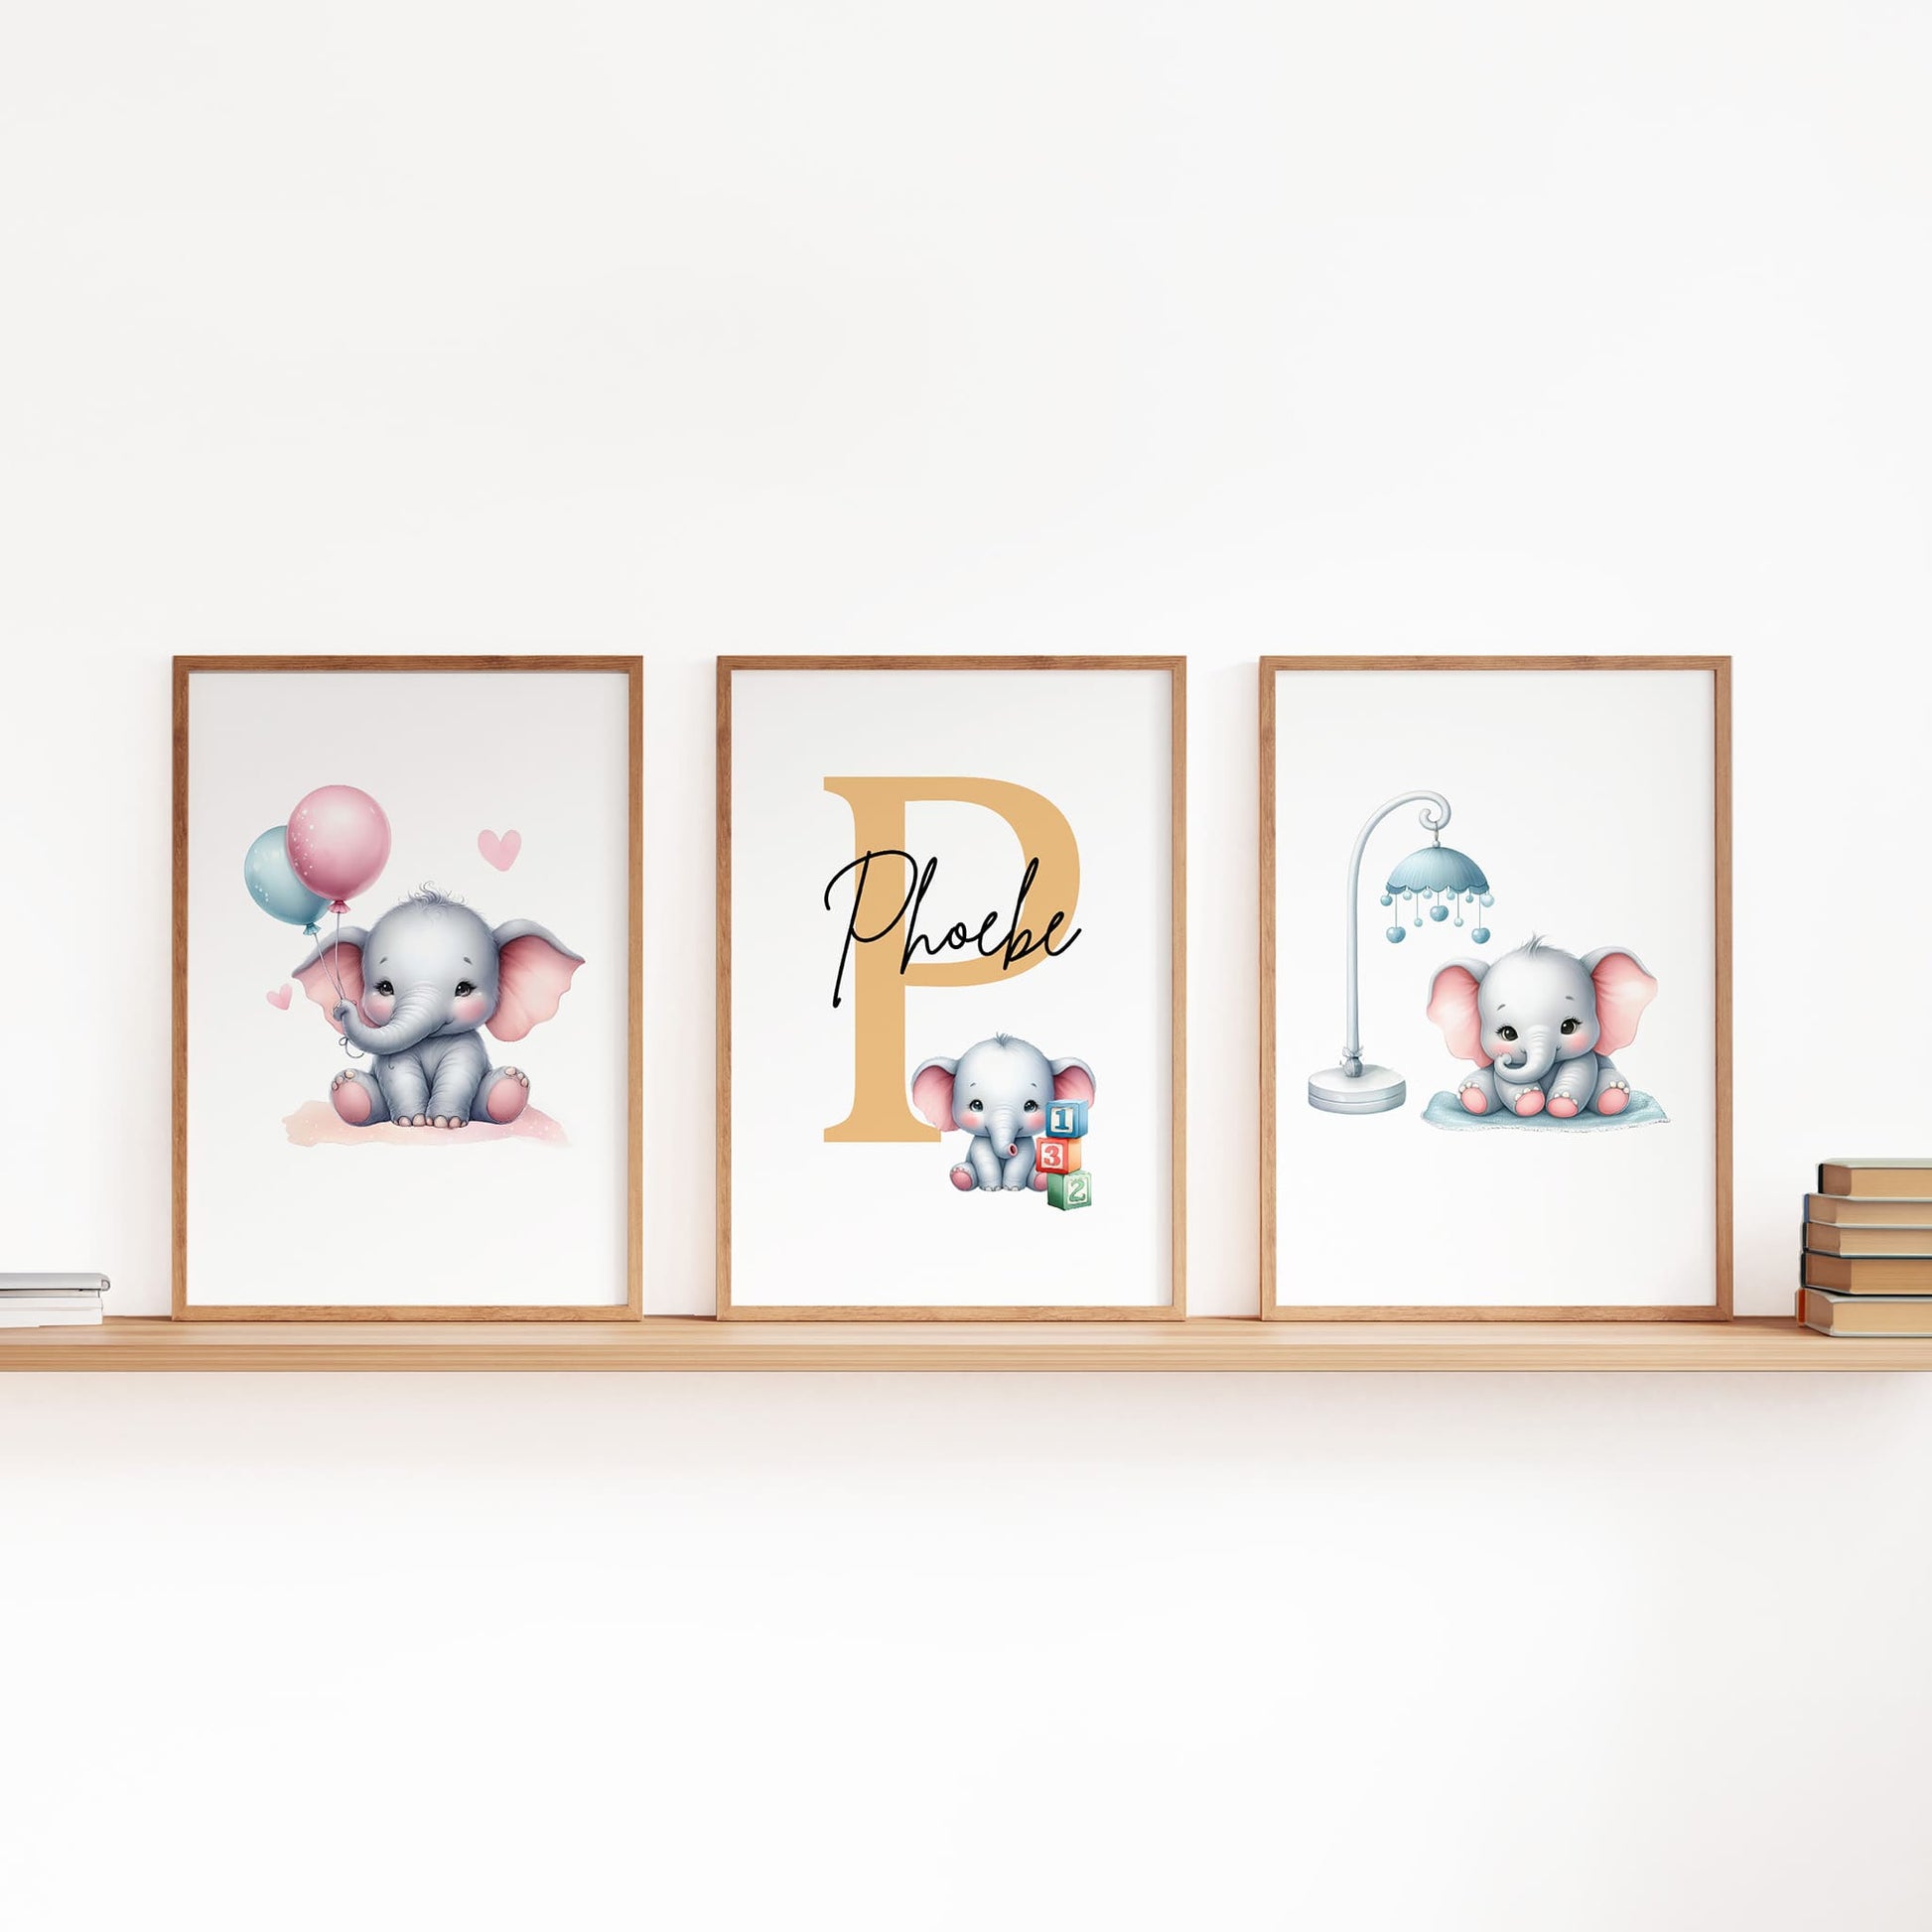 Set of three A4 prints in watercolour style. Each print depicts a cartoon baby elephant. In the first print, the elephant sit by a mobile; in the second, it holds a balloon. The middle elephant has counting clocks nearby and is smaller than the other two, with a large initial in the background. A personalised name in black overlays the initial.